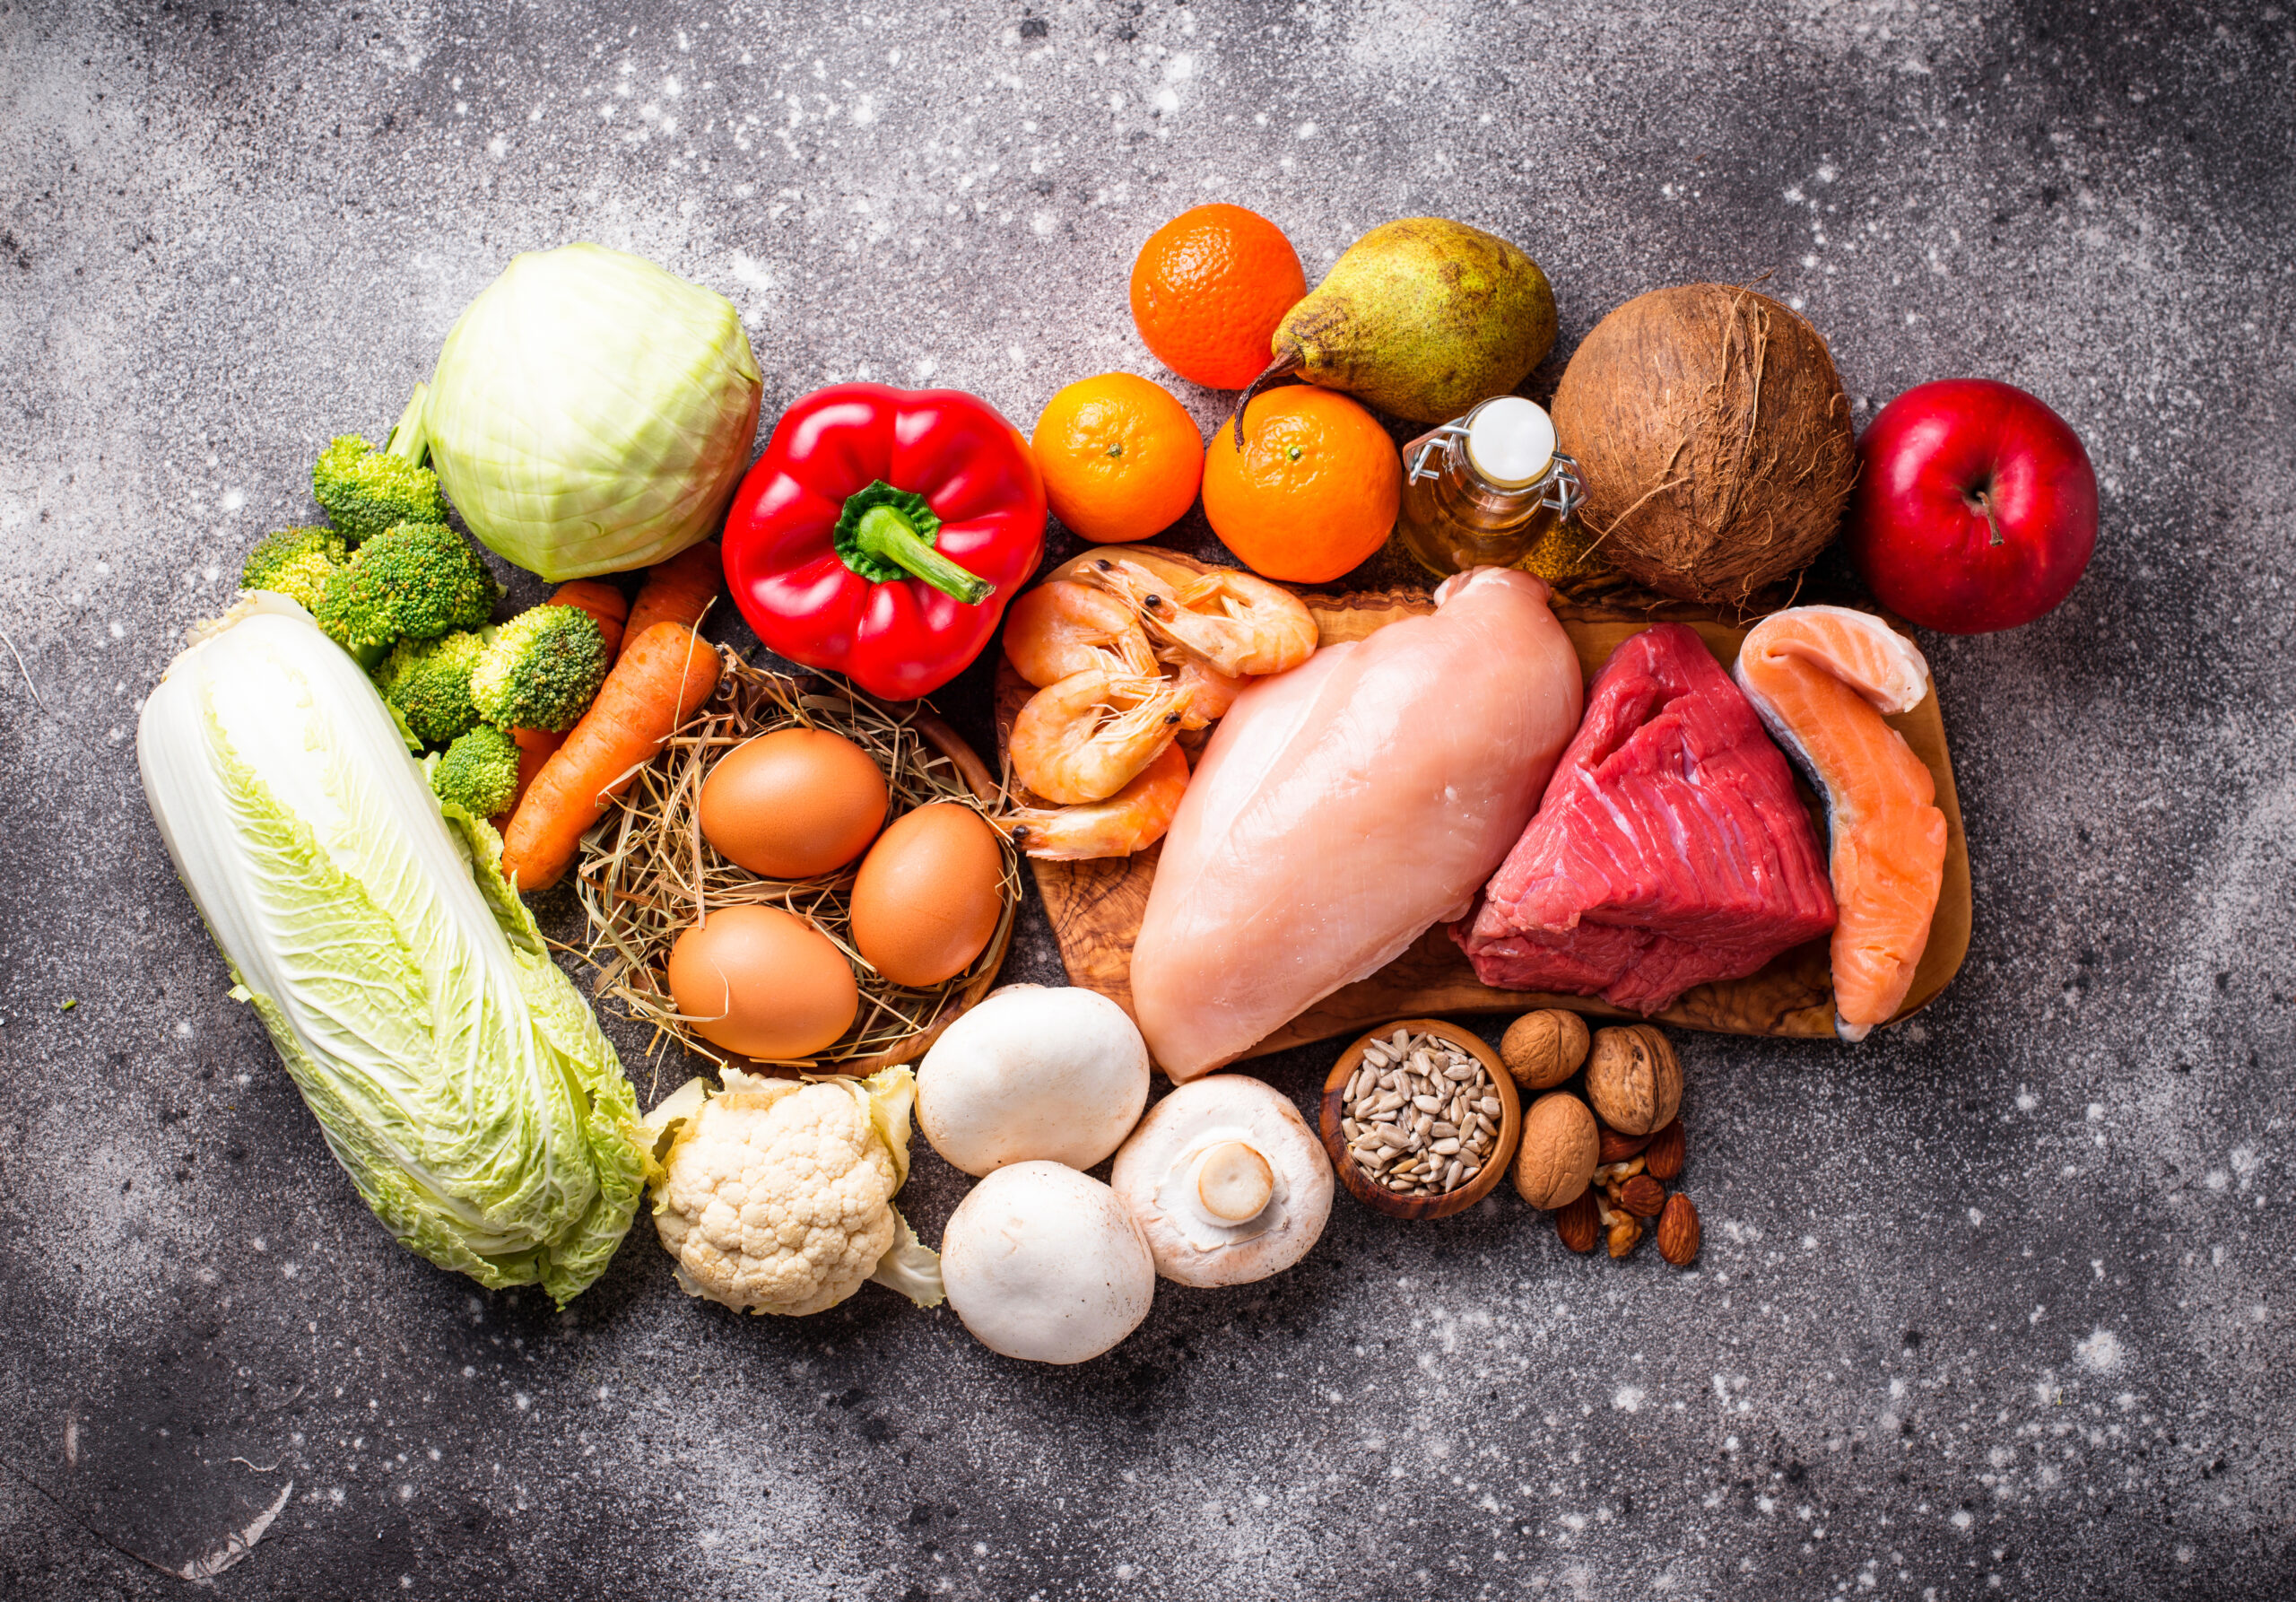 The paleo diet avoids all processed foods